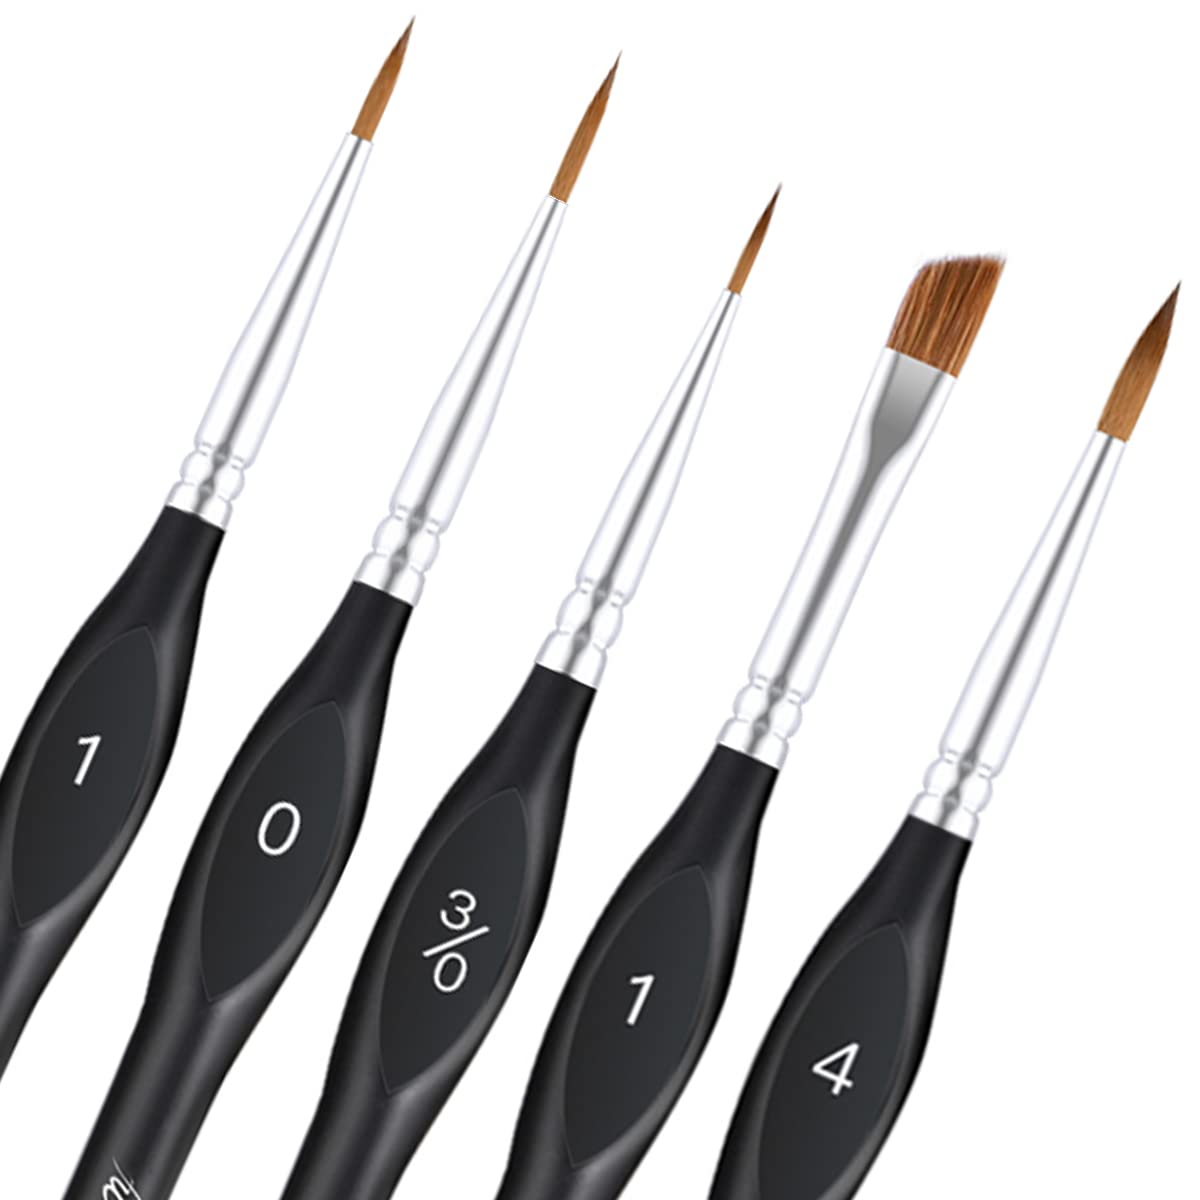 Kolinsky Sable Brush for Miniatures, Fuumuui 5pcs Fine Tip & Angle Sable  Detail Citadel Model Paint Brushes with Triangular Handle for Acrylic  Painting on Canvas, Watercolor, Oil, Model Painting